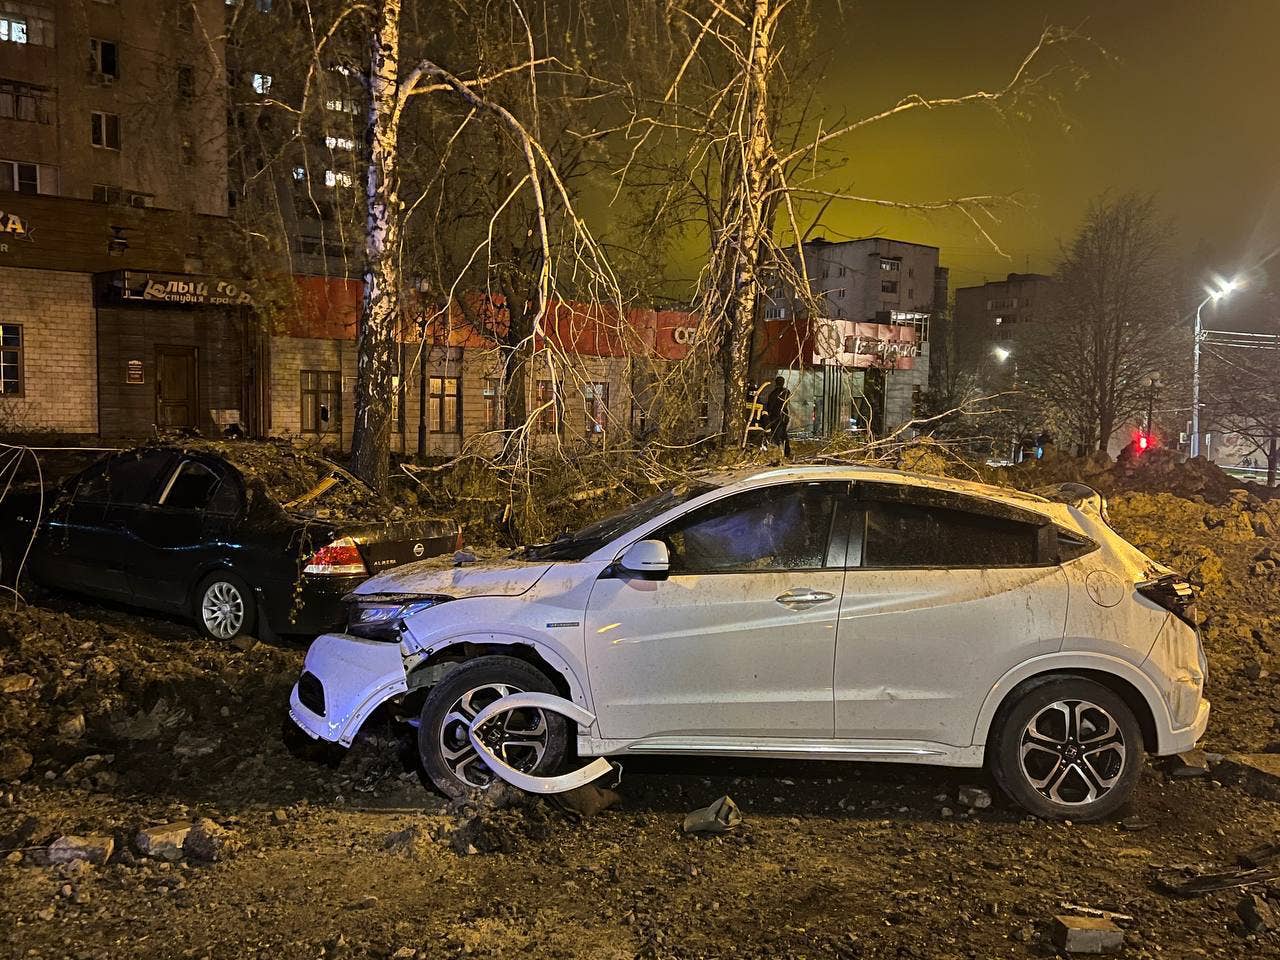 A view of some of the damaged cars after the incident. <em>Photo by Belgorod Region Governorate/Handout/Anadolu Agency via Getty Images</em>